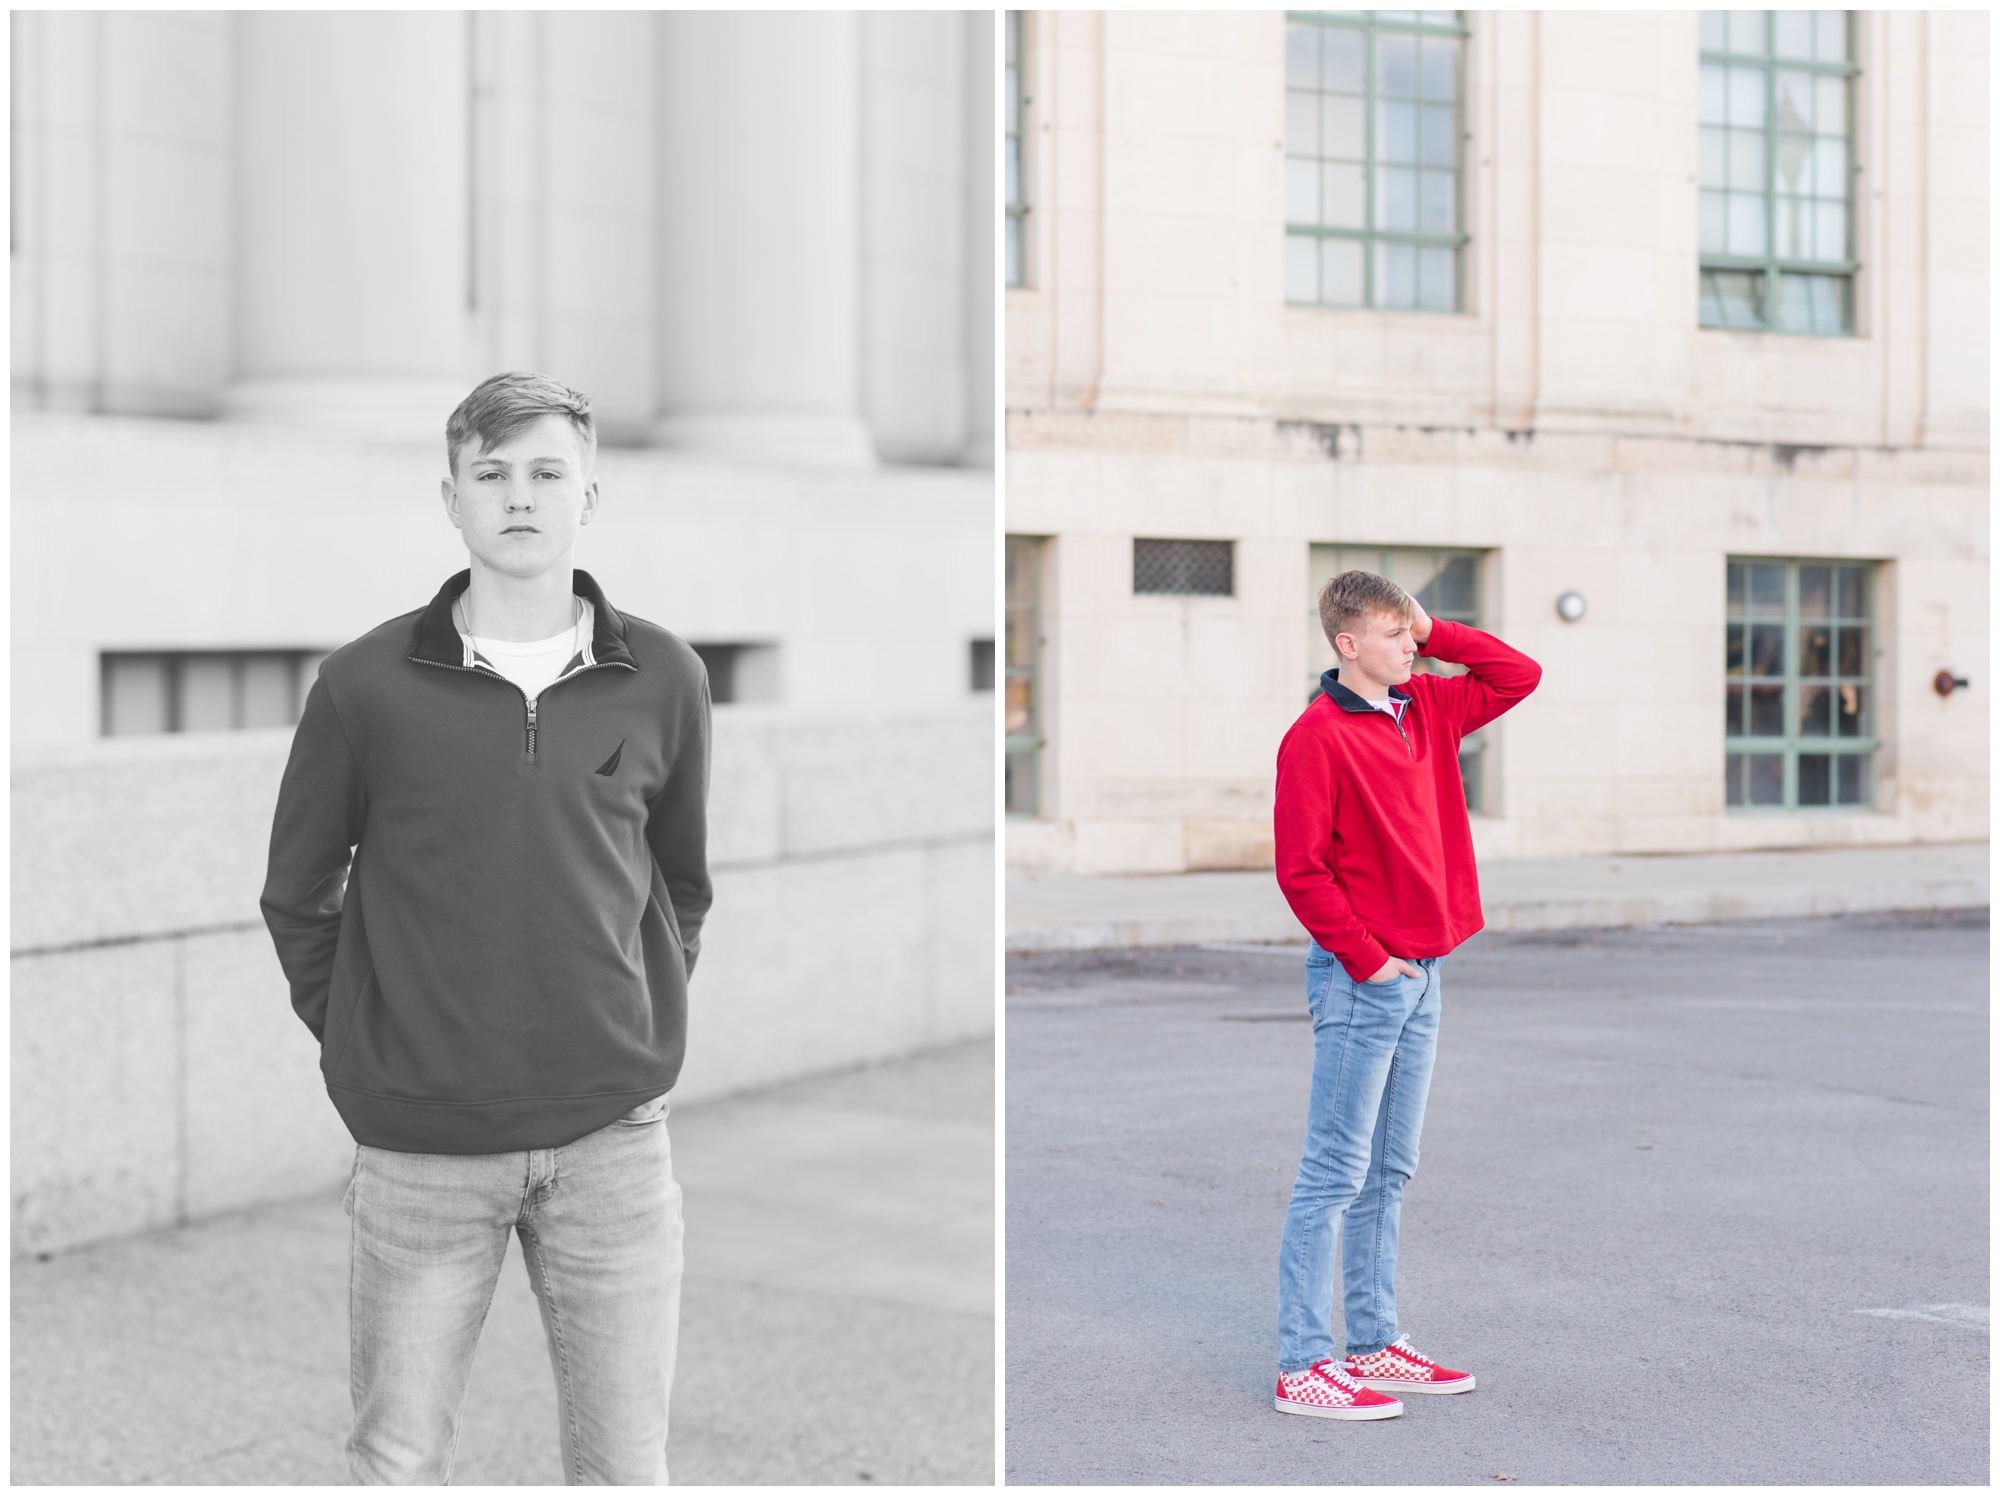 Fort Worth Senior Session | Downtown Fort Worth Senior Session | Fort Worth Senior Photographer | Lauren Grimes Photography